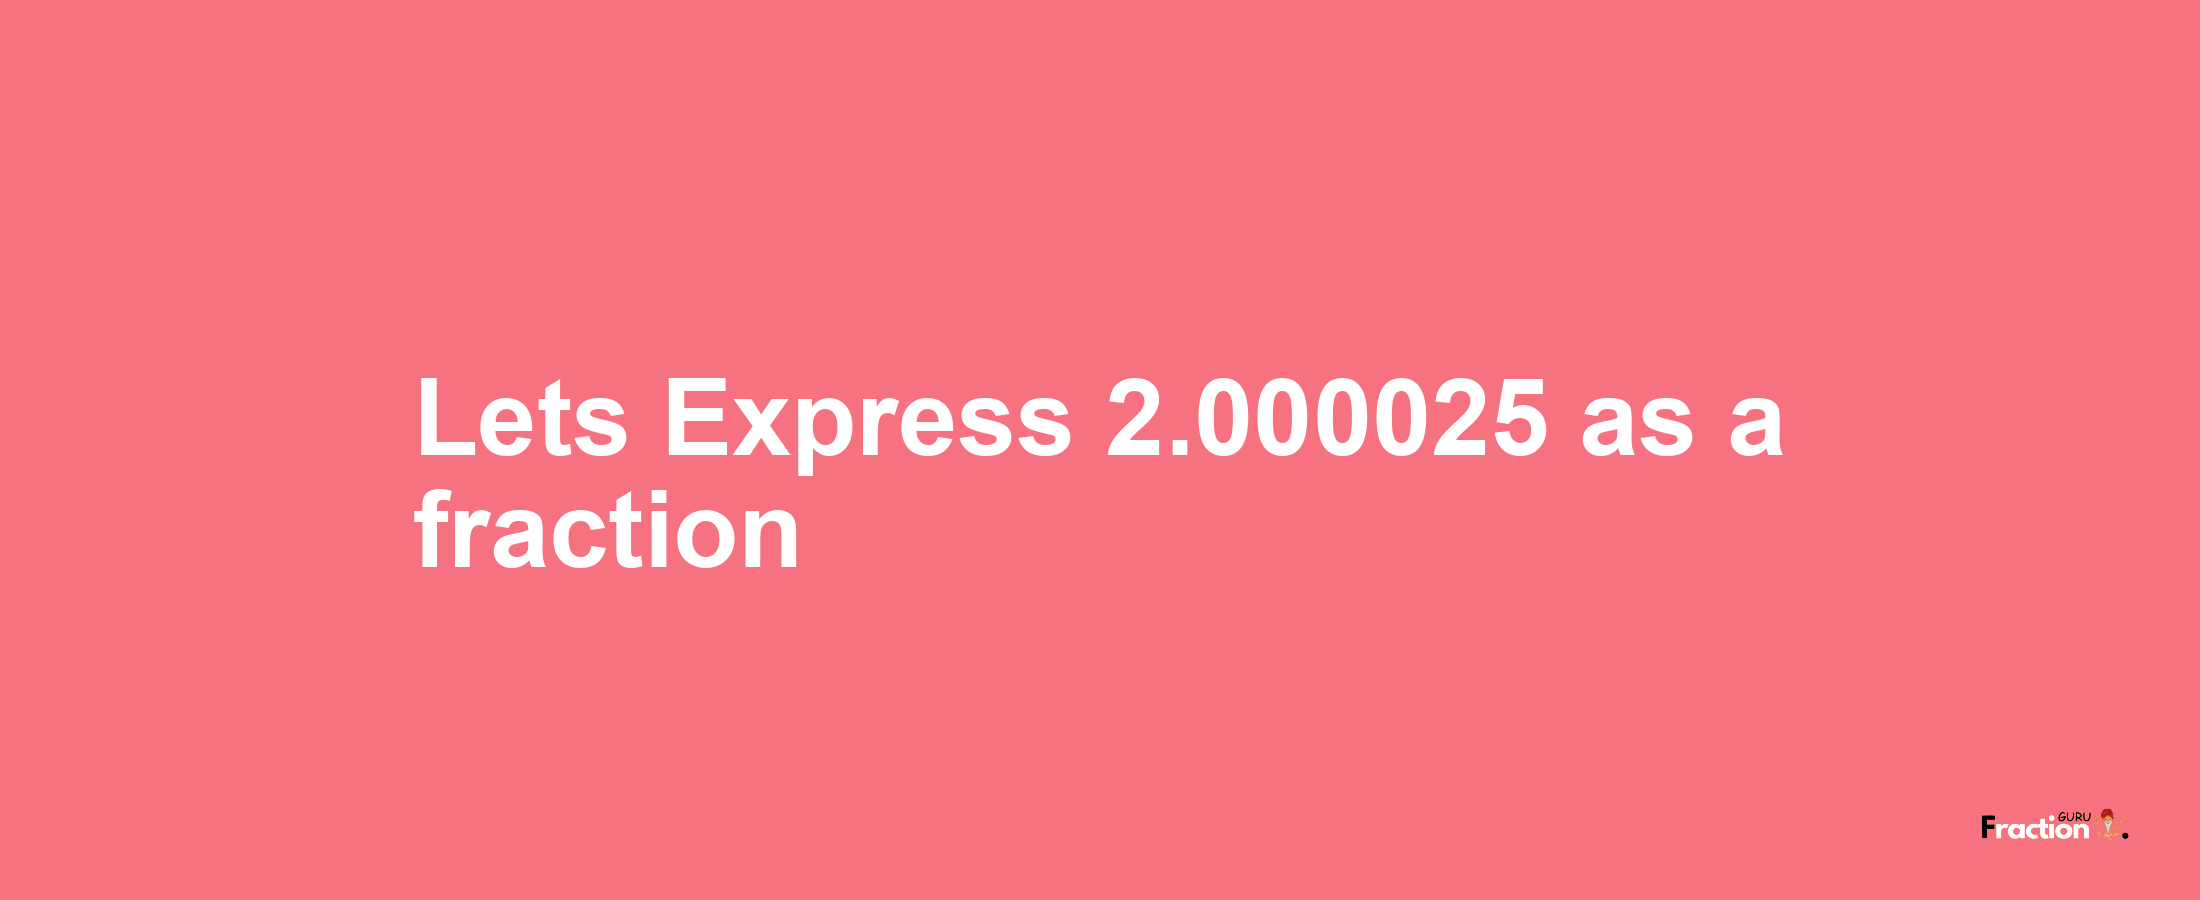 Lets Express 2.000025 as afraction